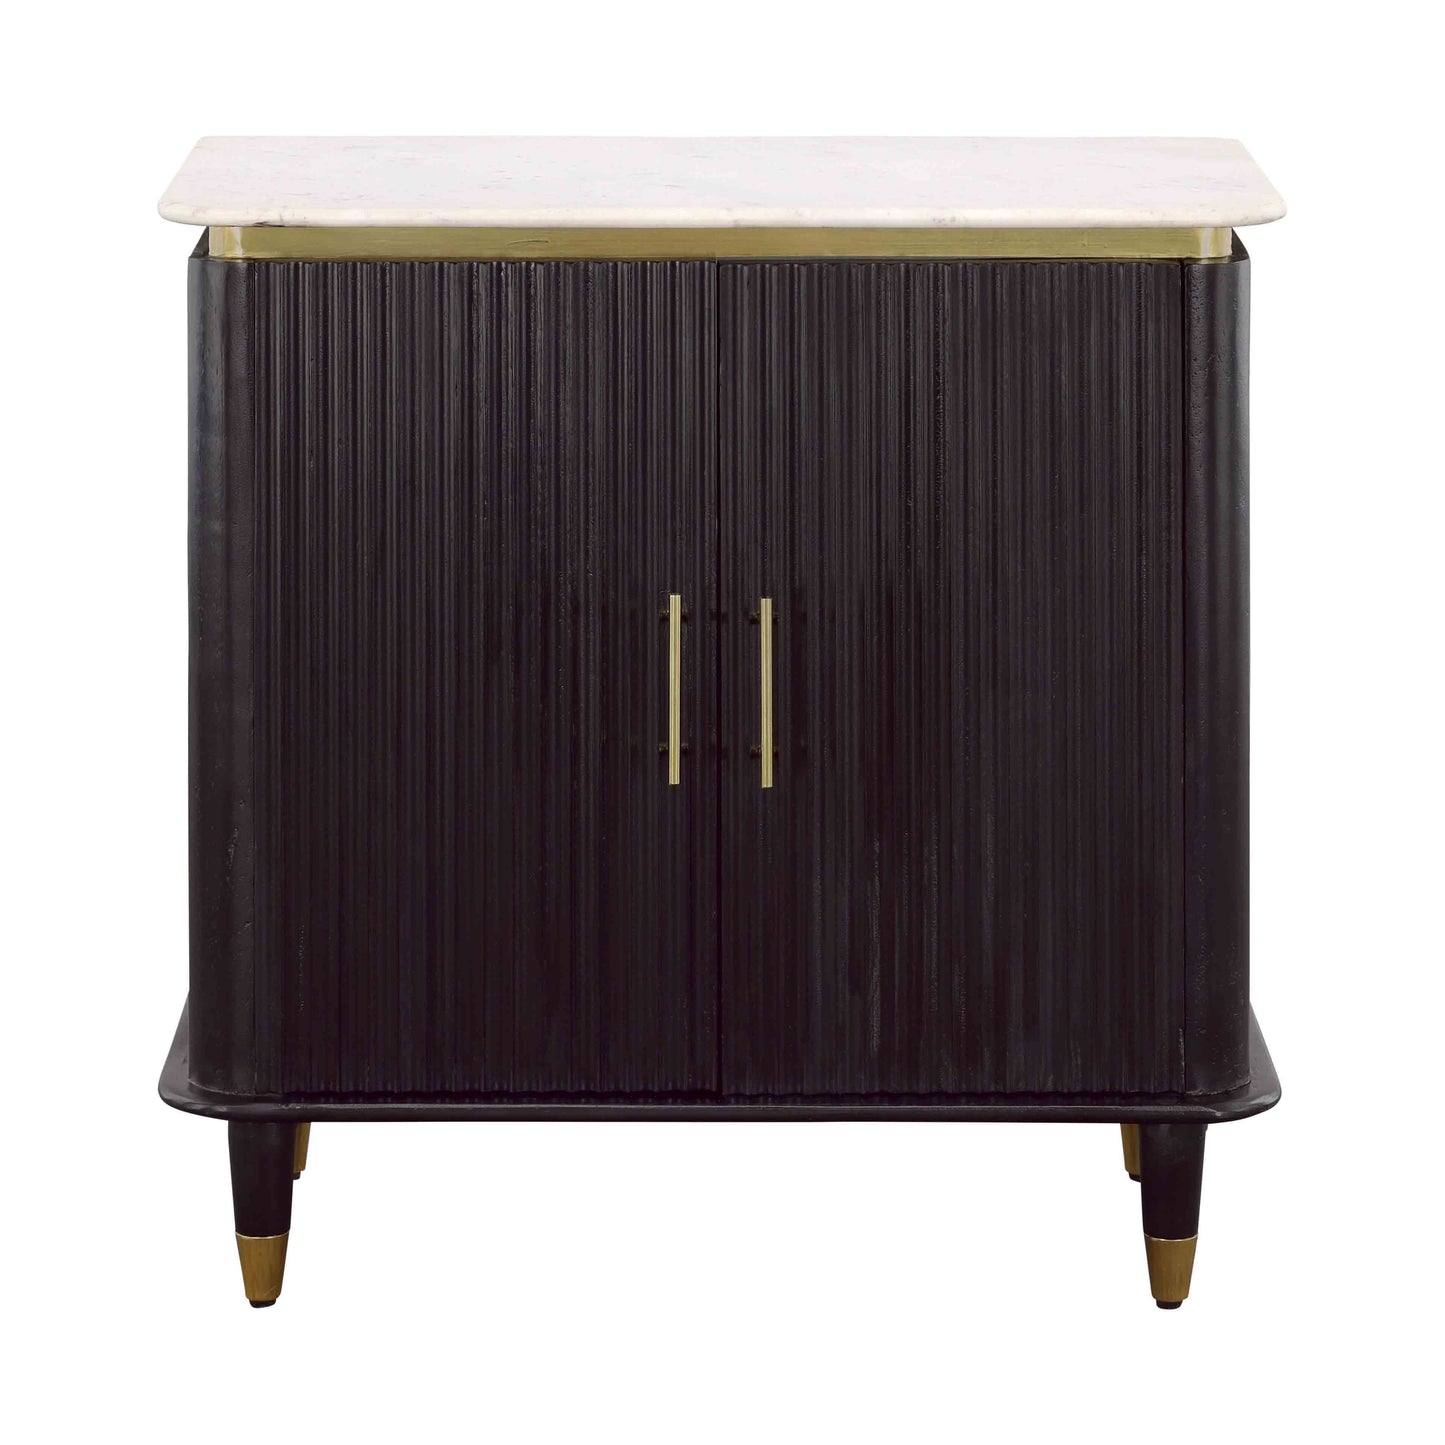 Carlyle - Two Door Cabinet - Black / Gold